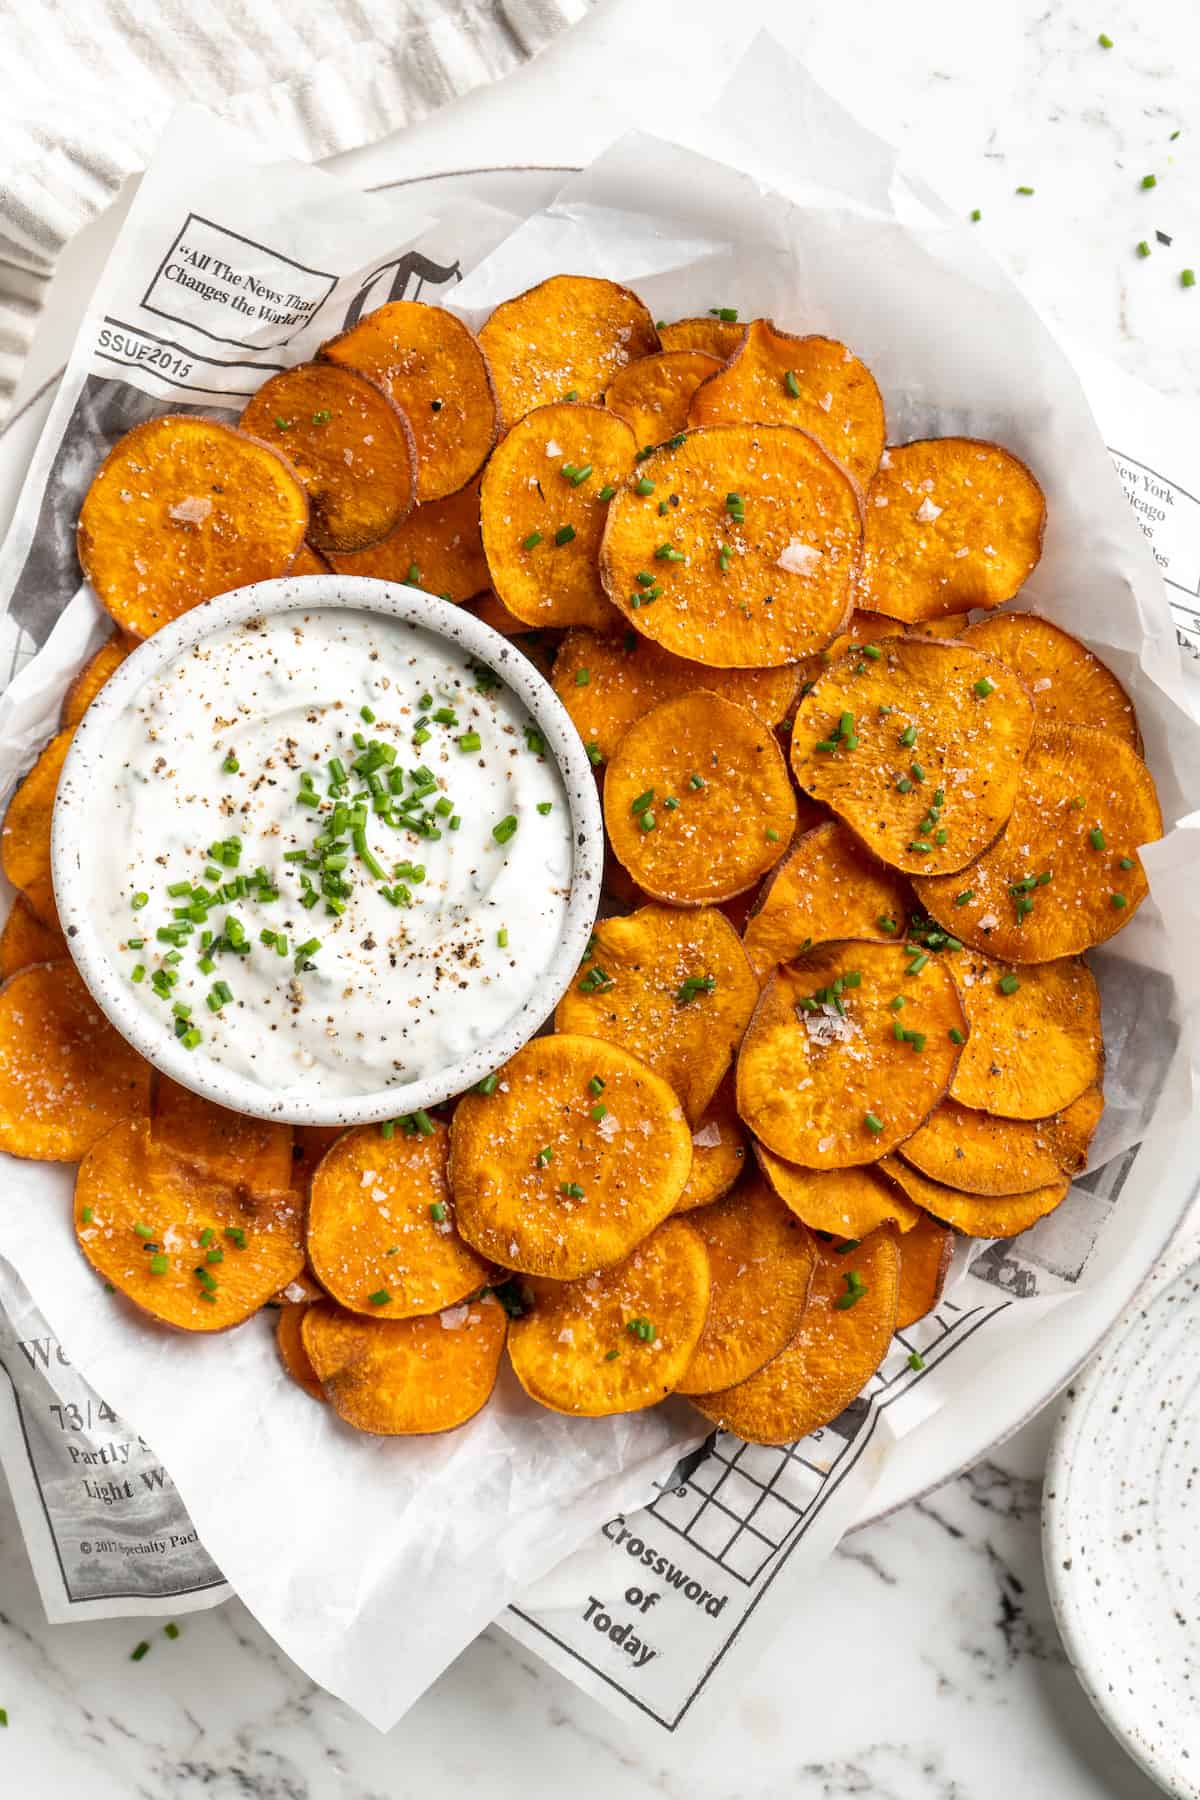 Overhead view of sweet potato chips on plate with bowl of dip